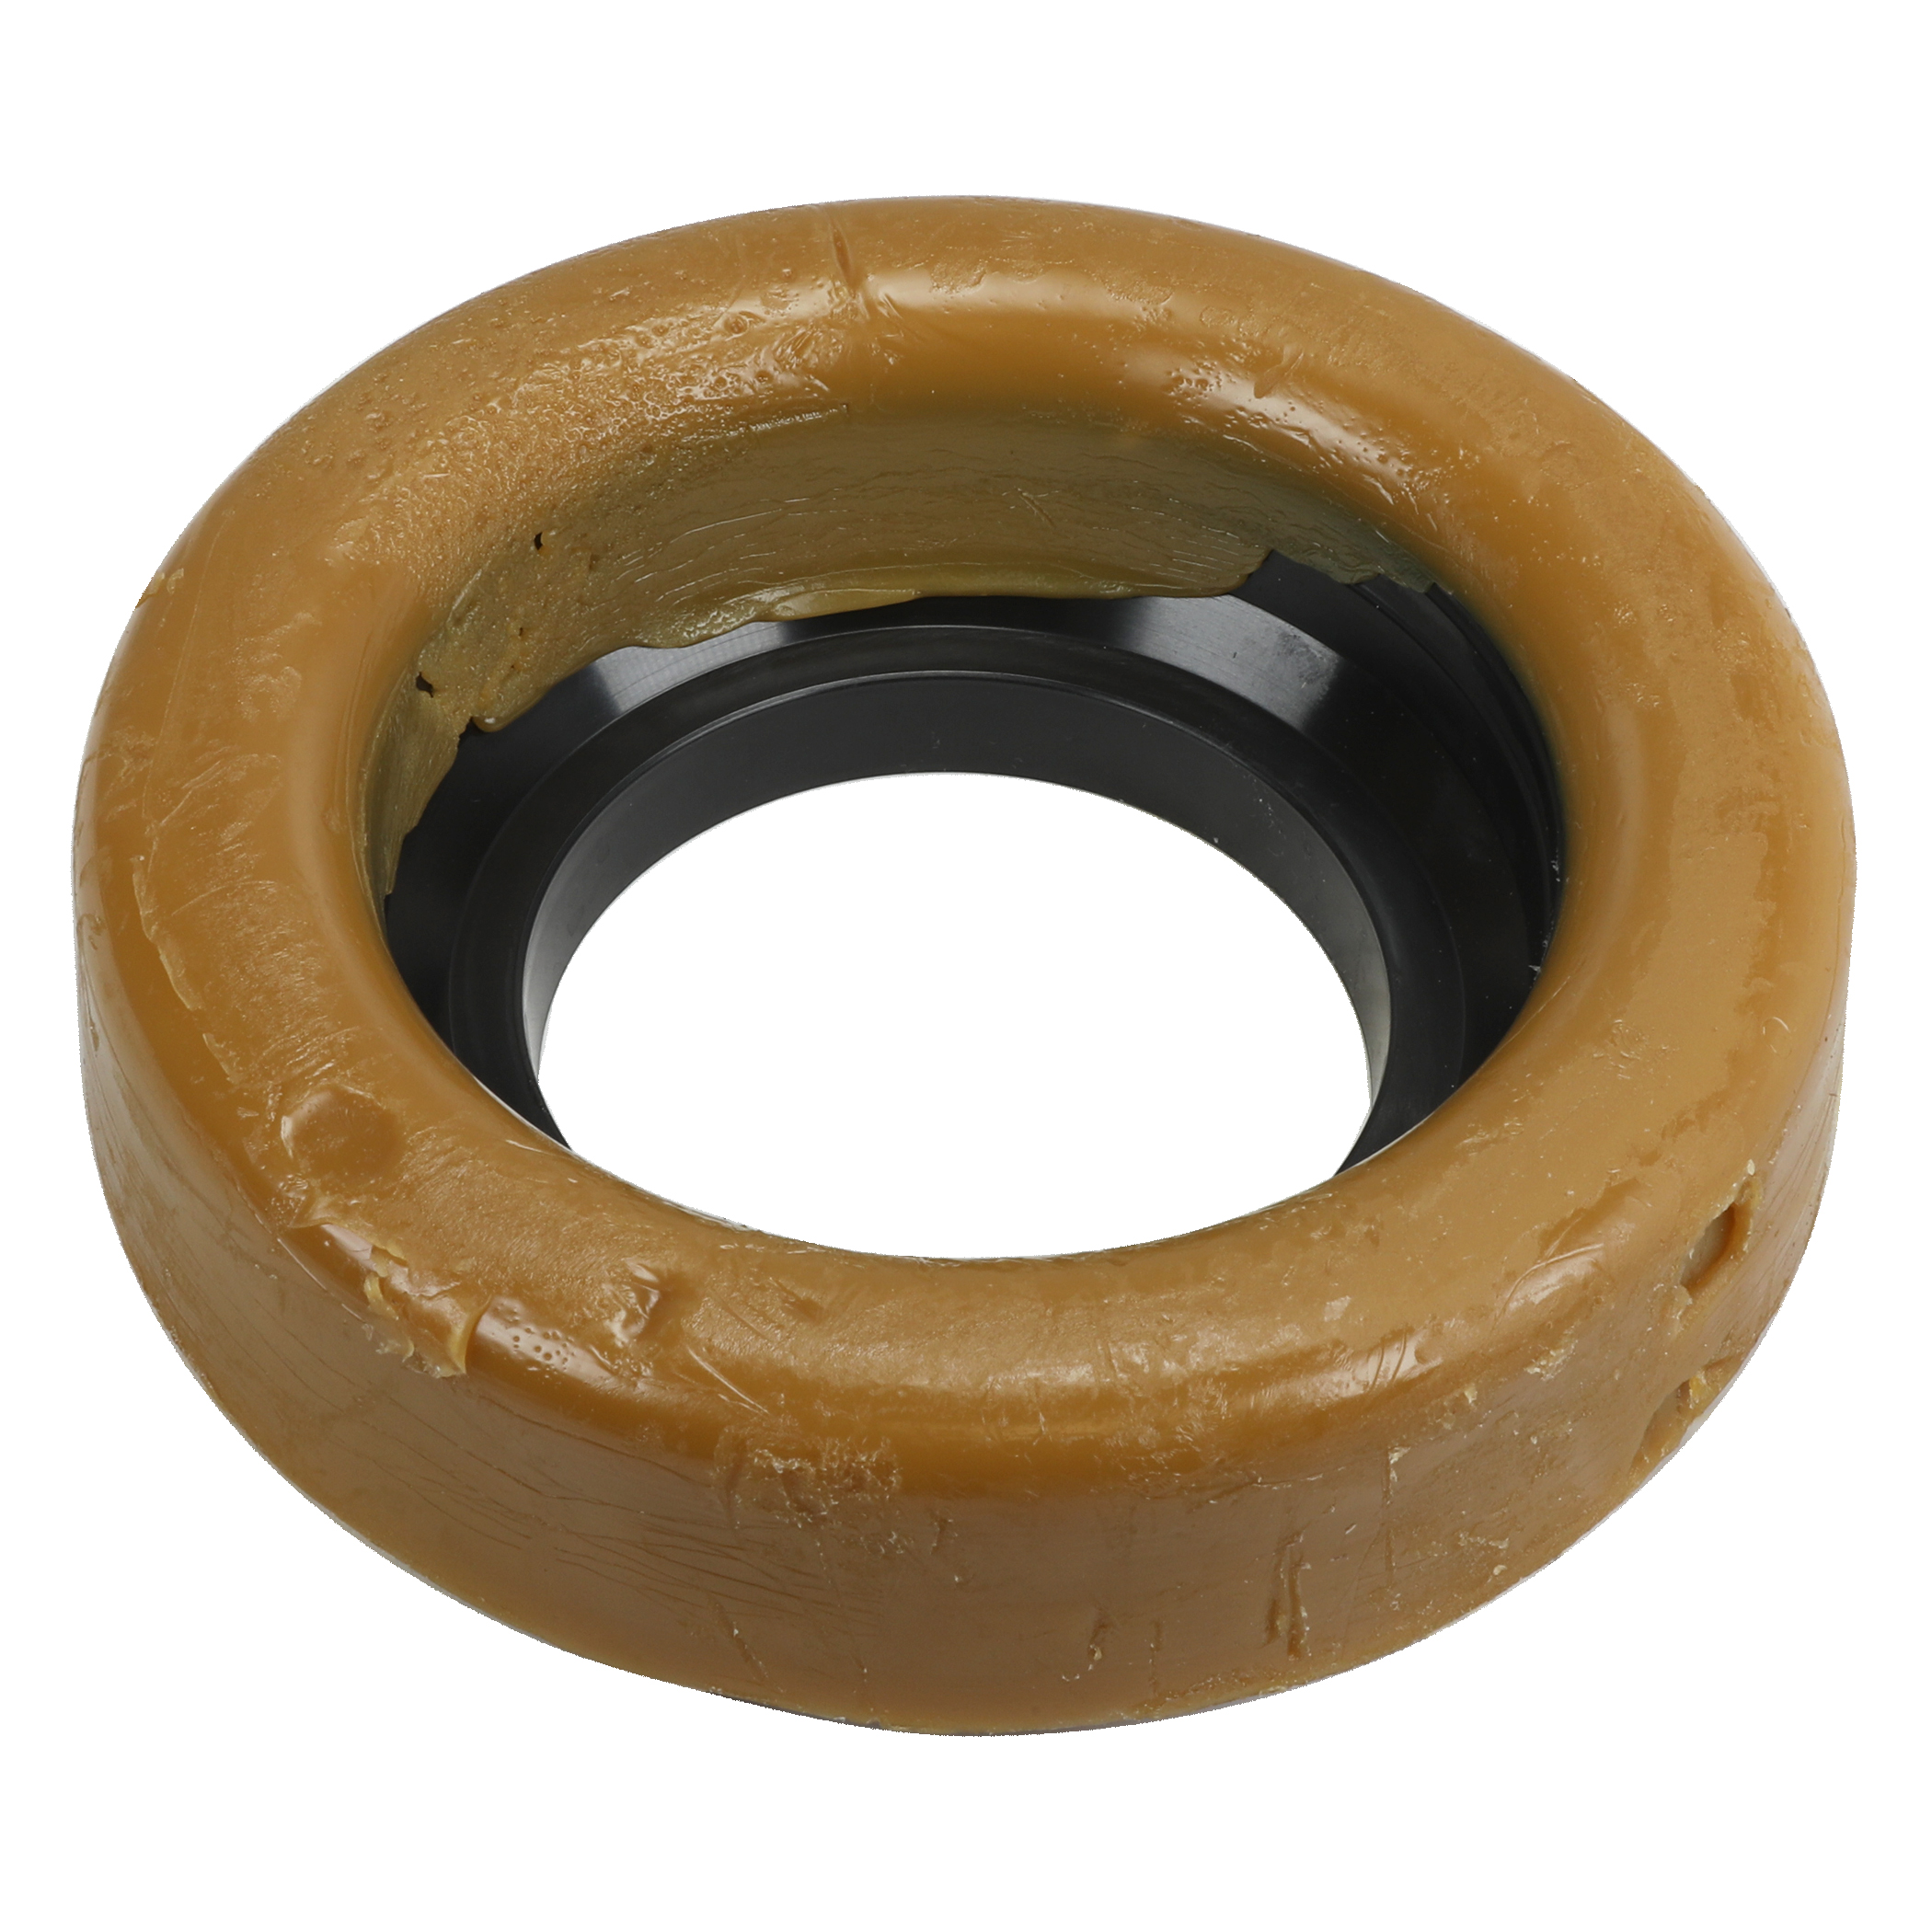 Extra Thick Toilet Wax Ring with Sleeve